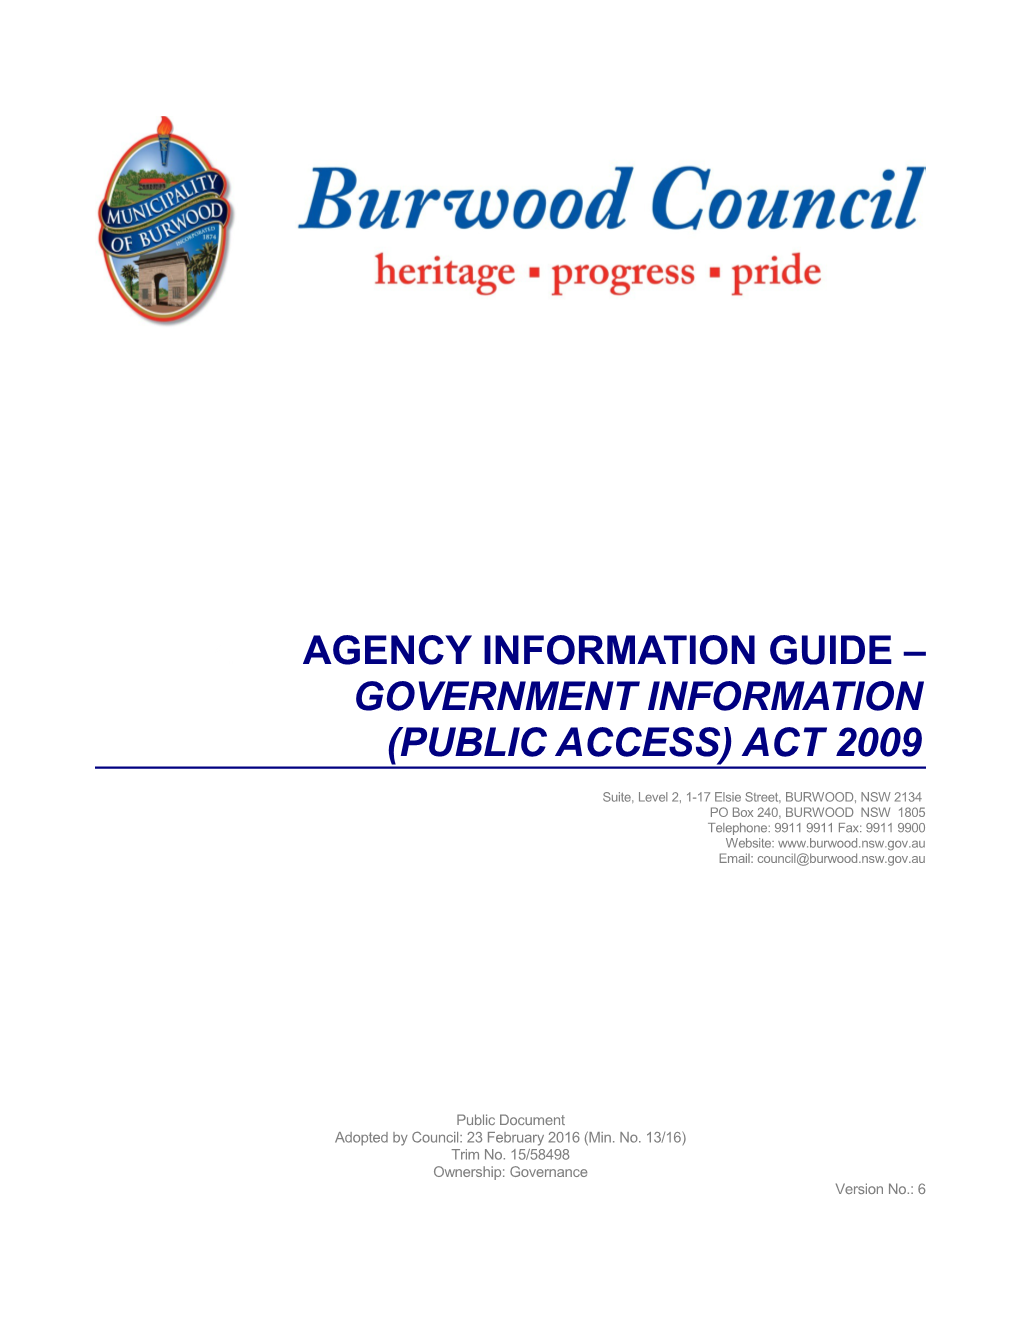 Agency Information Guide Government Information (Public Access) Act 2009